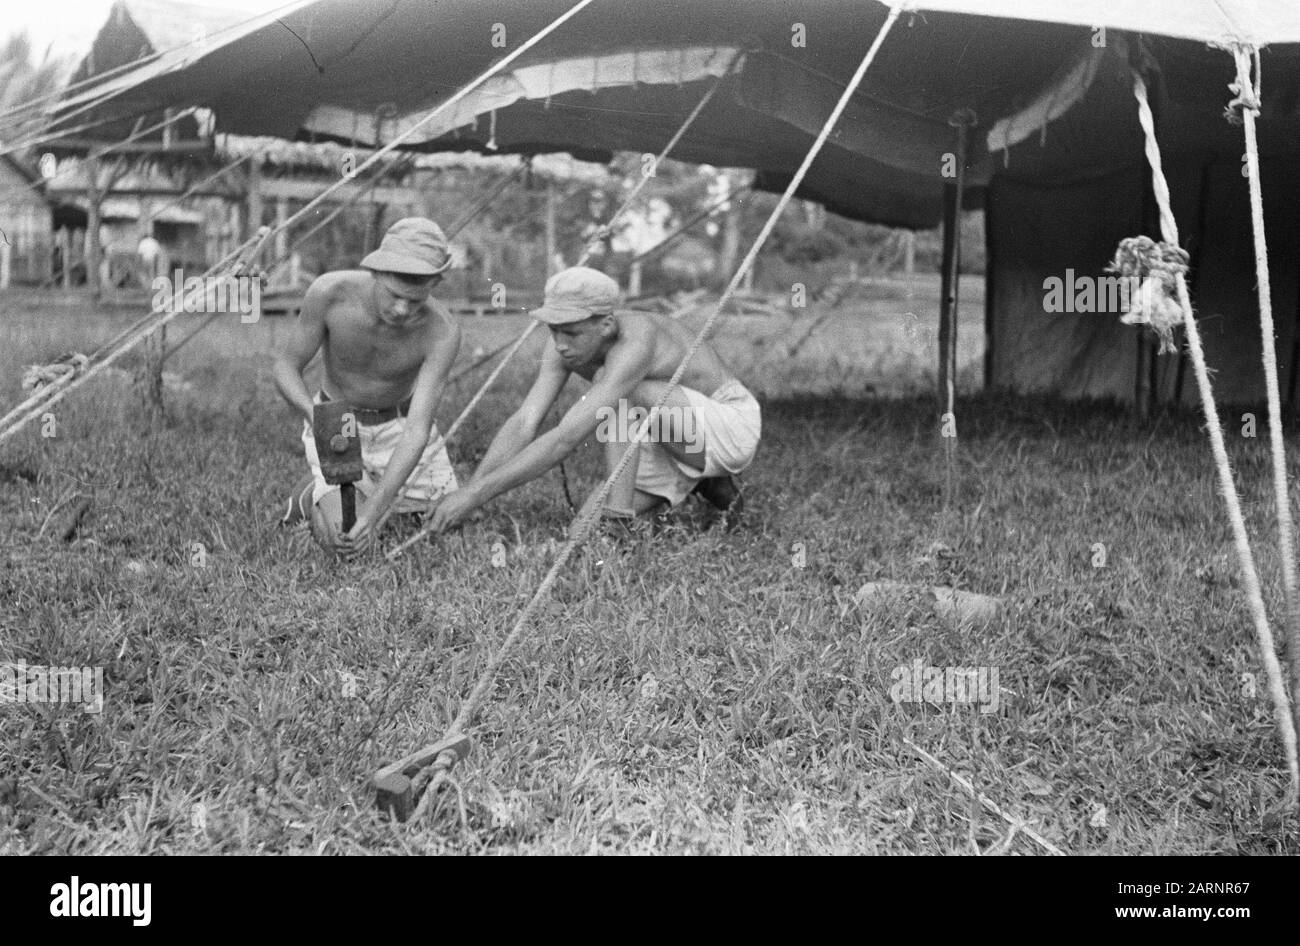 Recordings concerning border traffic  [Tinggi Hari. Two soldiers store pegs for building tents] Date: 29 July 1948 Location: Indonesia, Java, Dutch East Indies, Tinggi Hari Stock Photo